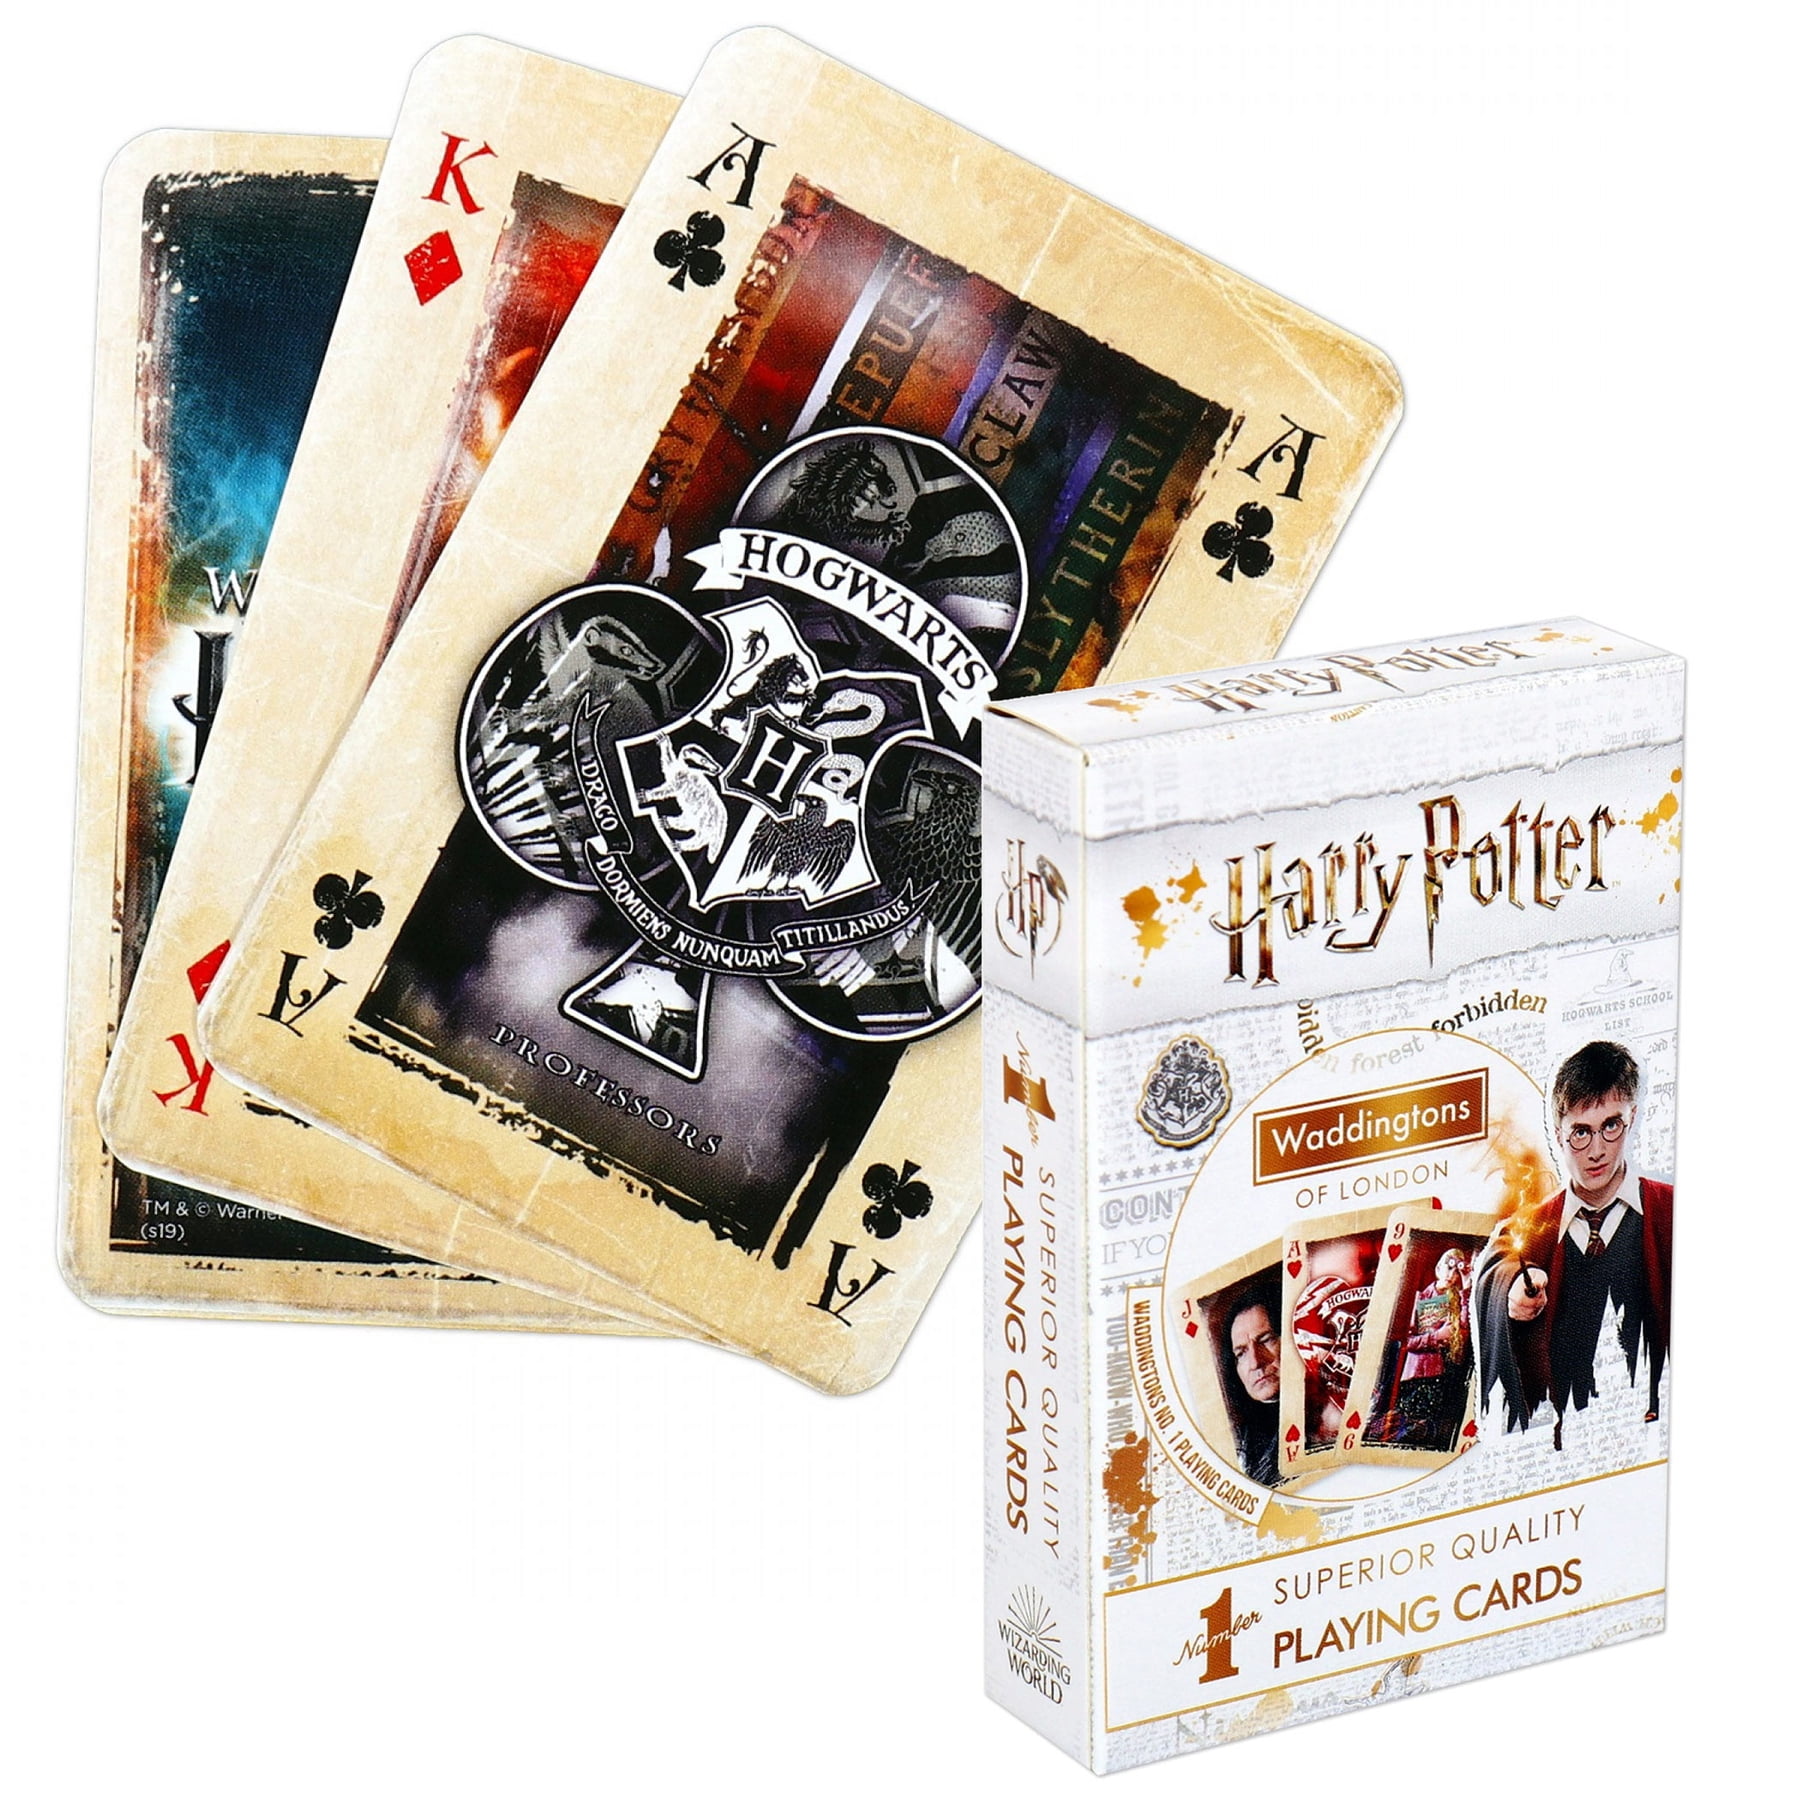 Top Trumps Harry Potter Card Games Brand New & Sealed Direct from Manufacturer 